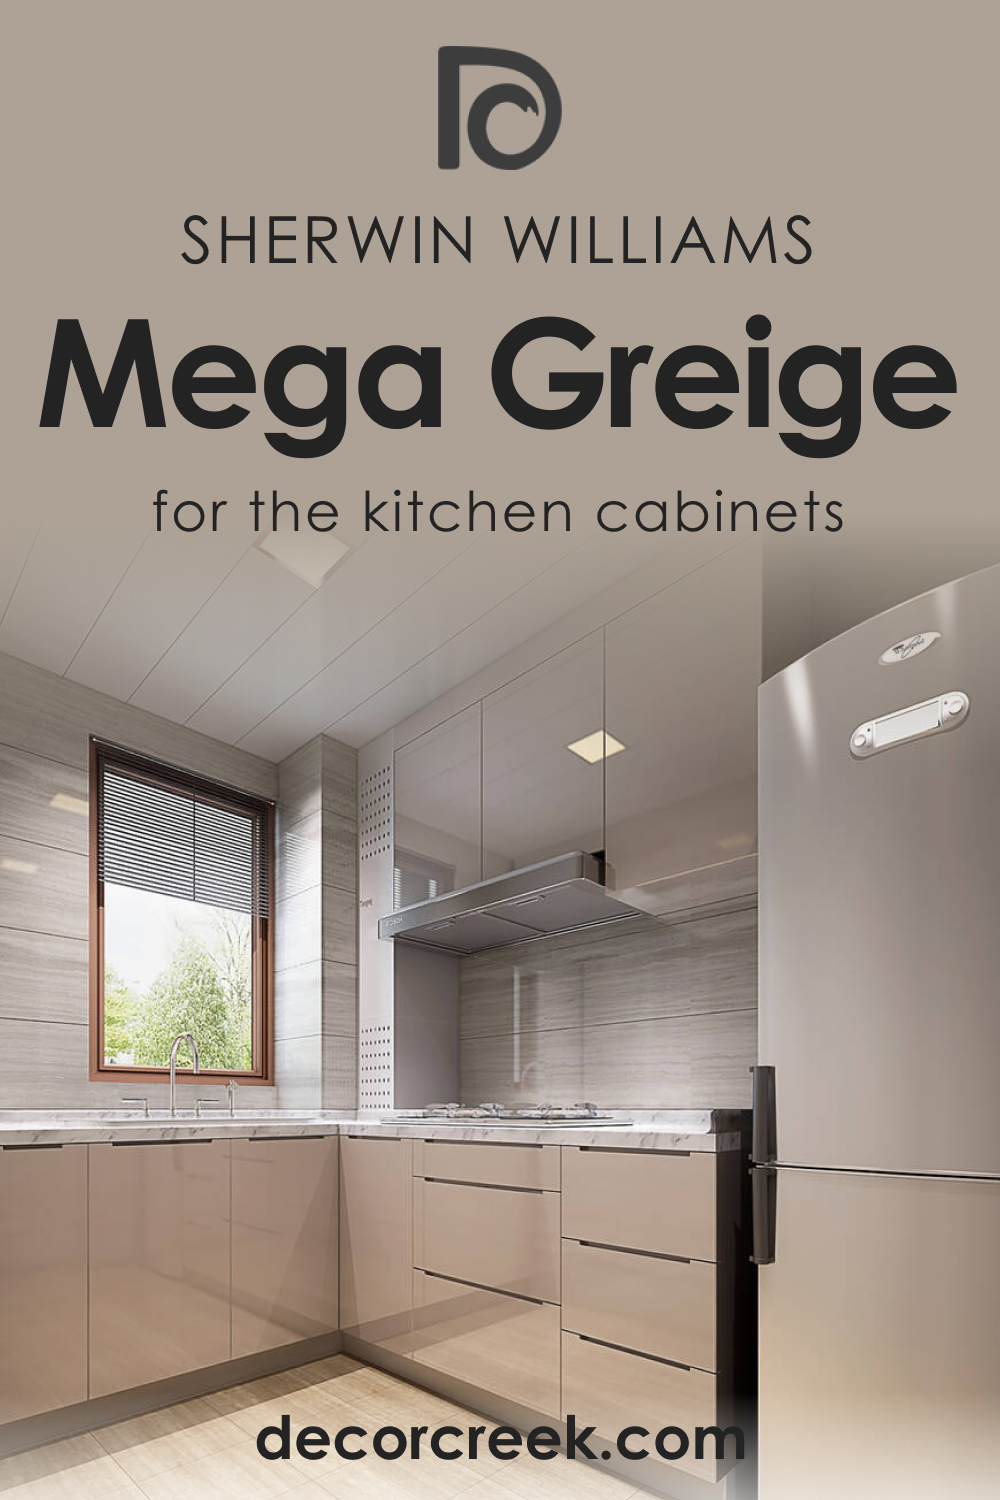 How to Use SW 7031 Mega Greige for the Kitchen Cabinets?